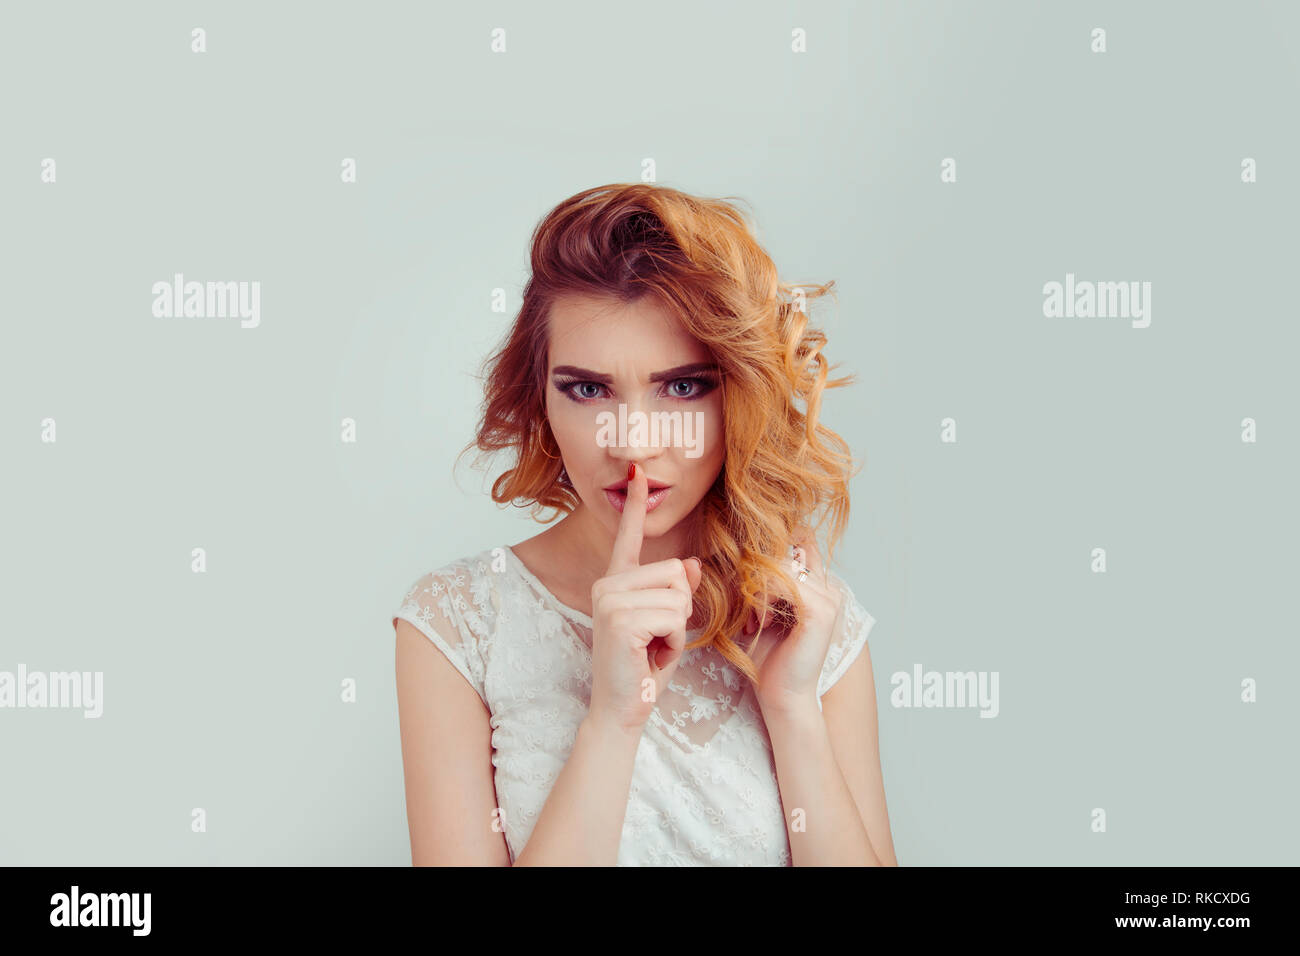 Woman asking for silence or secrecy with finger on lips hush hand gesture Stock Photo